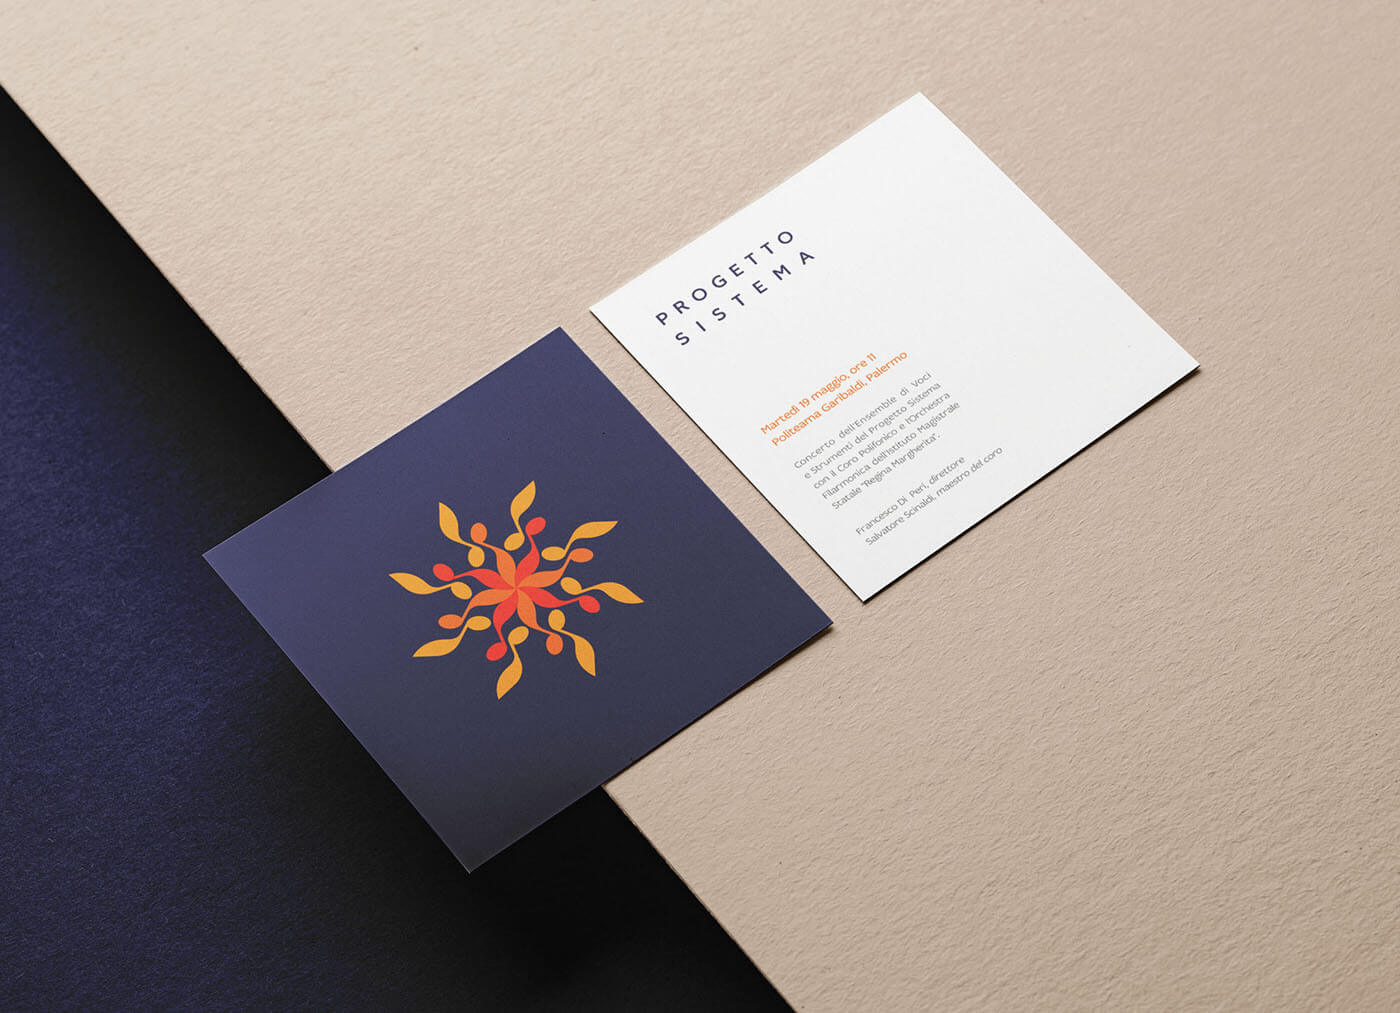 Brand design for Progetto Sistema, classical music for social innovation in Palermo, Sicily, Italy